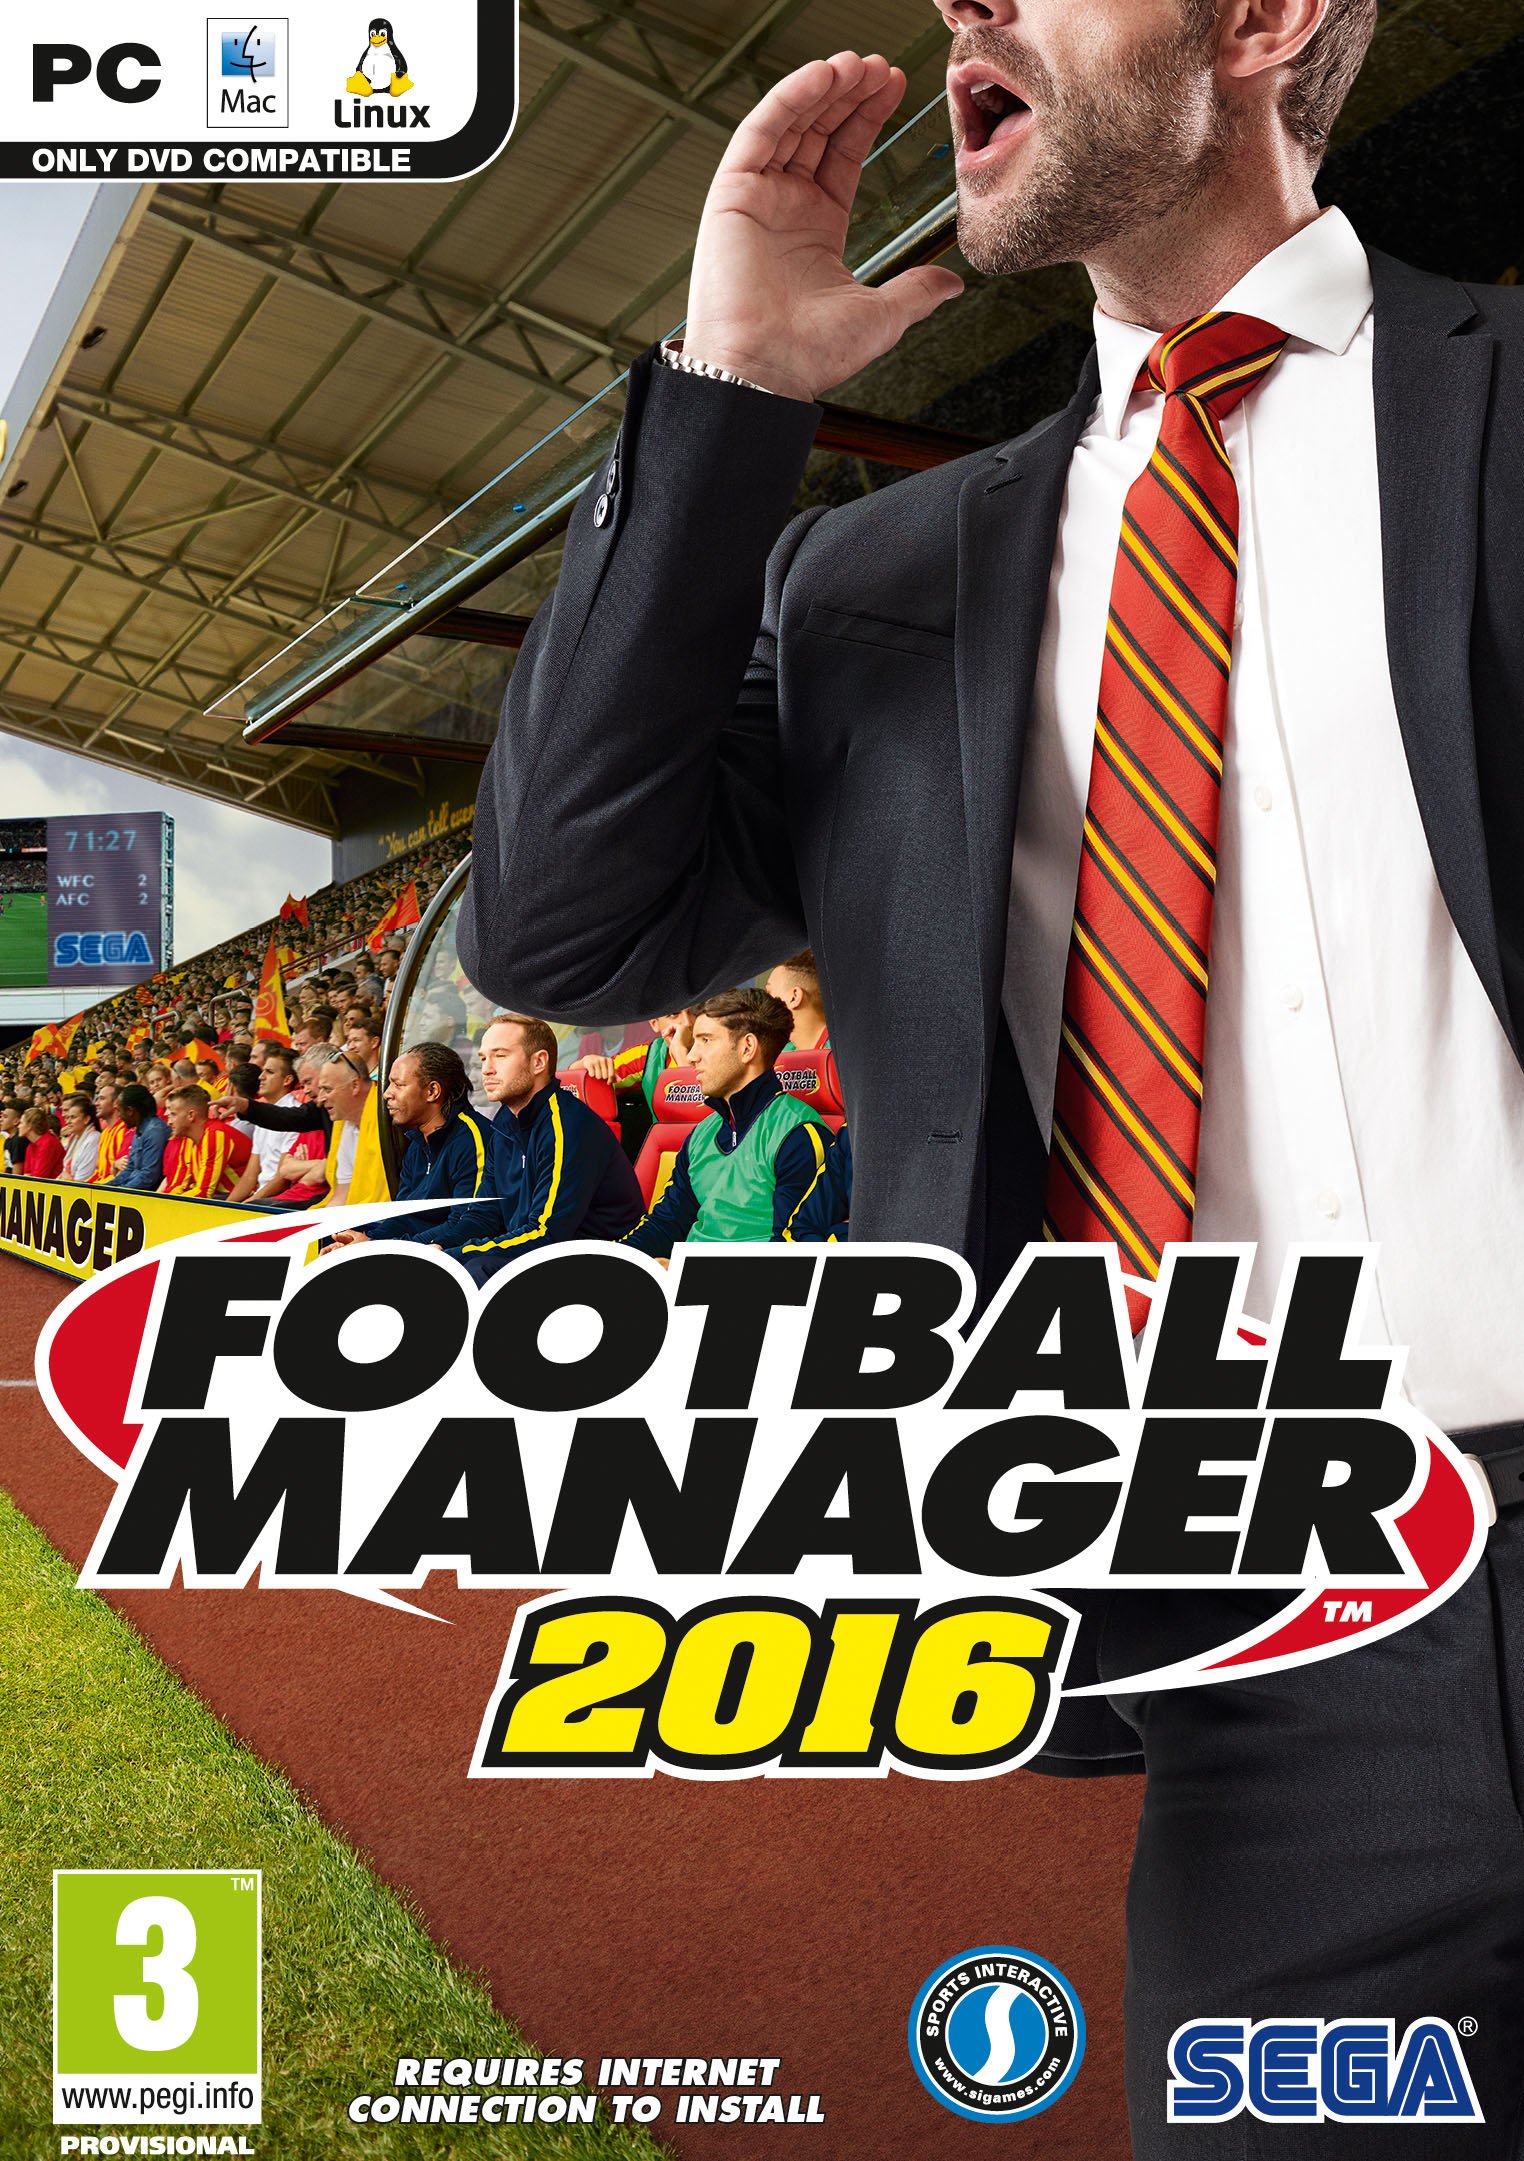 download football manager 2016 steam